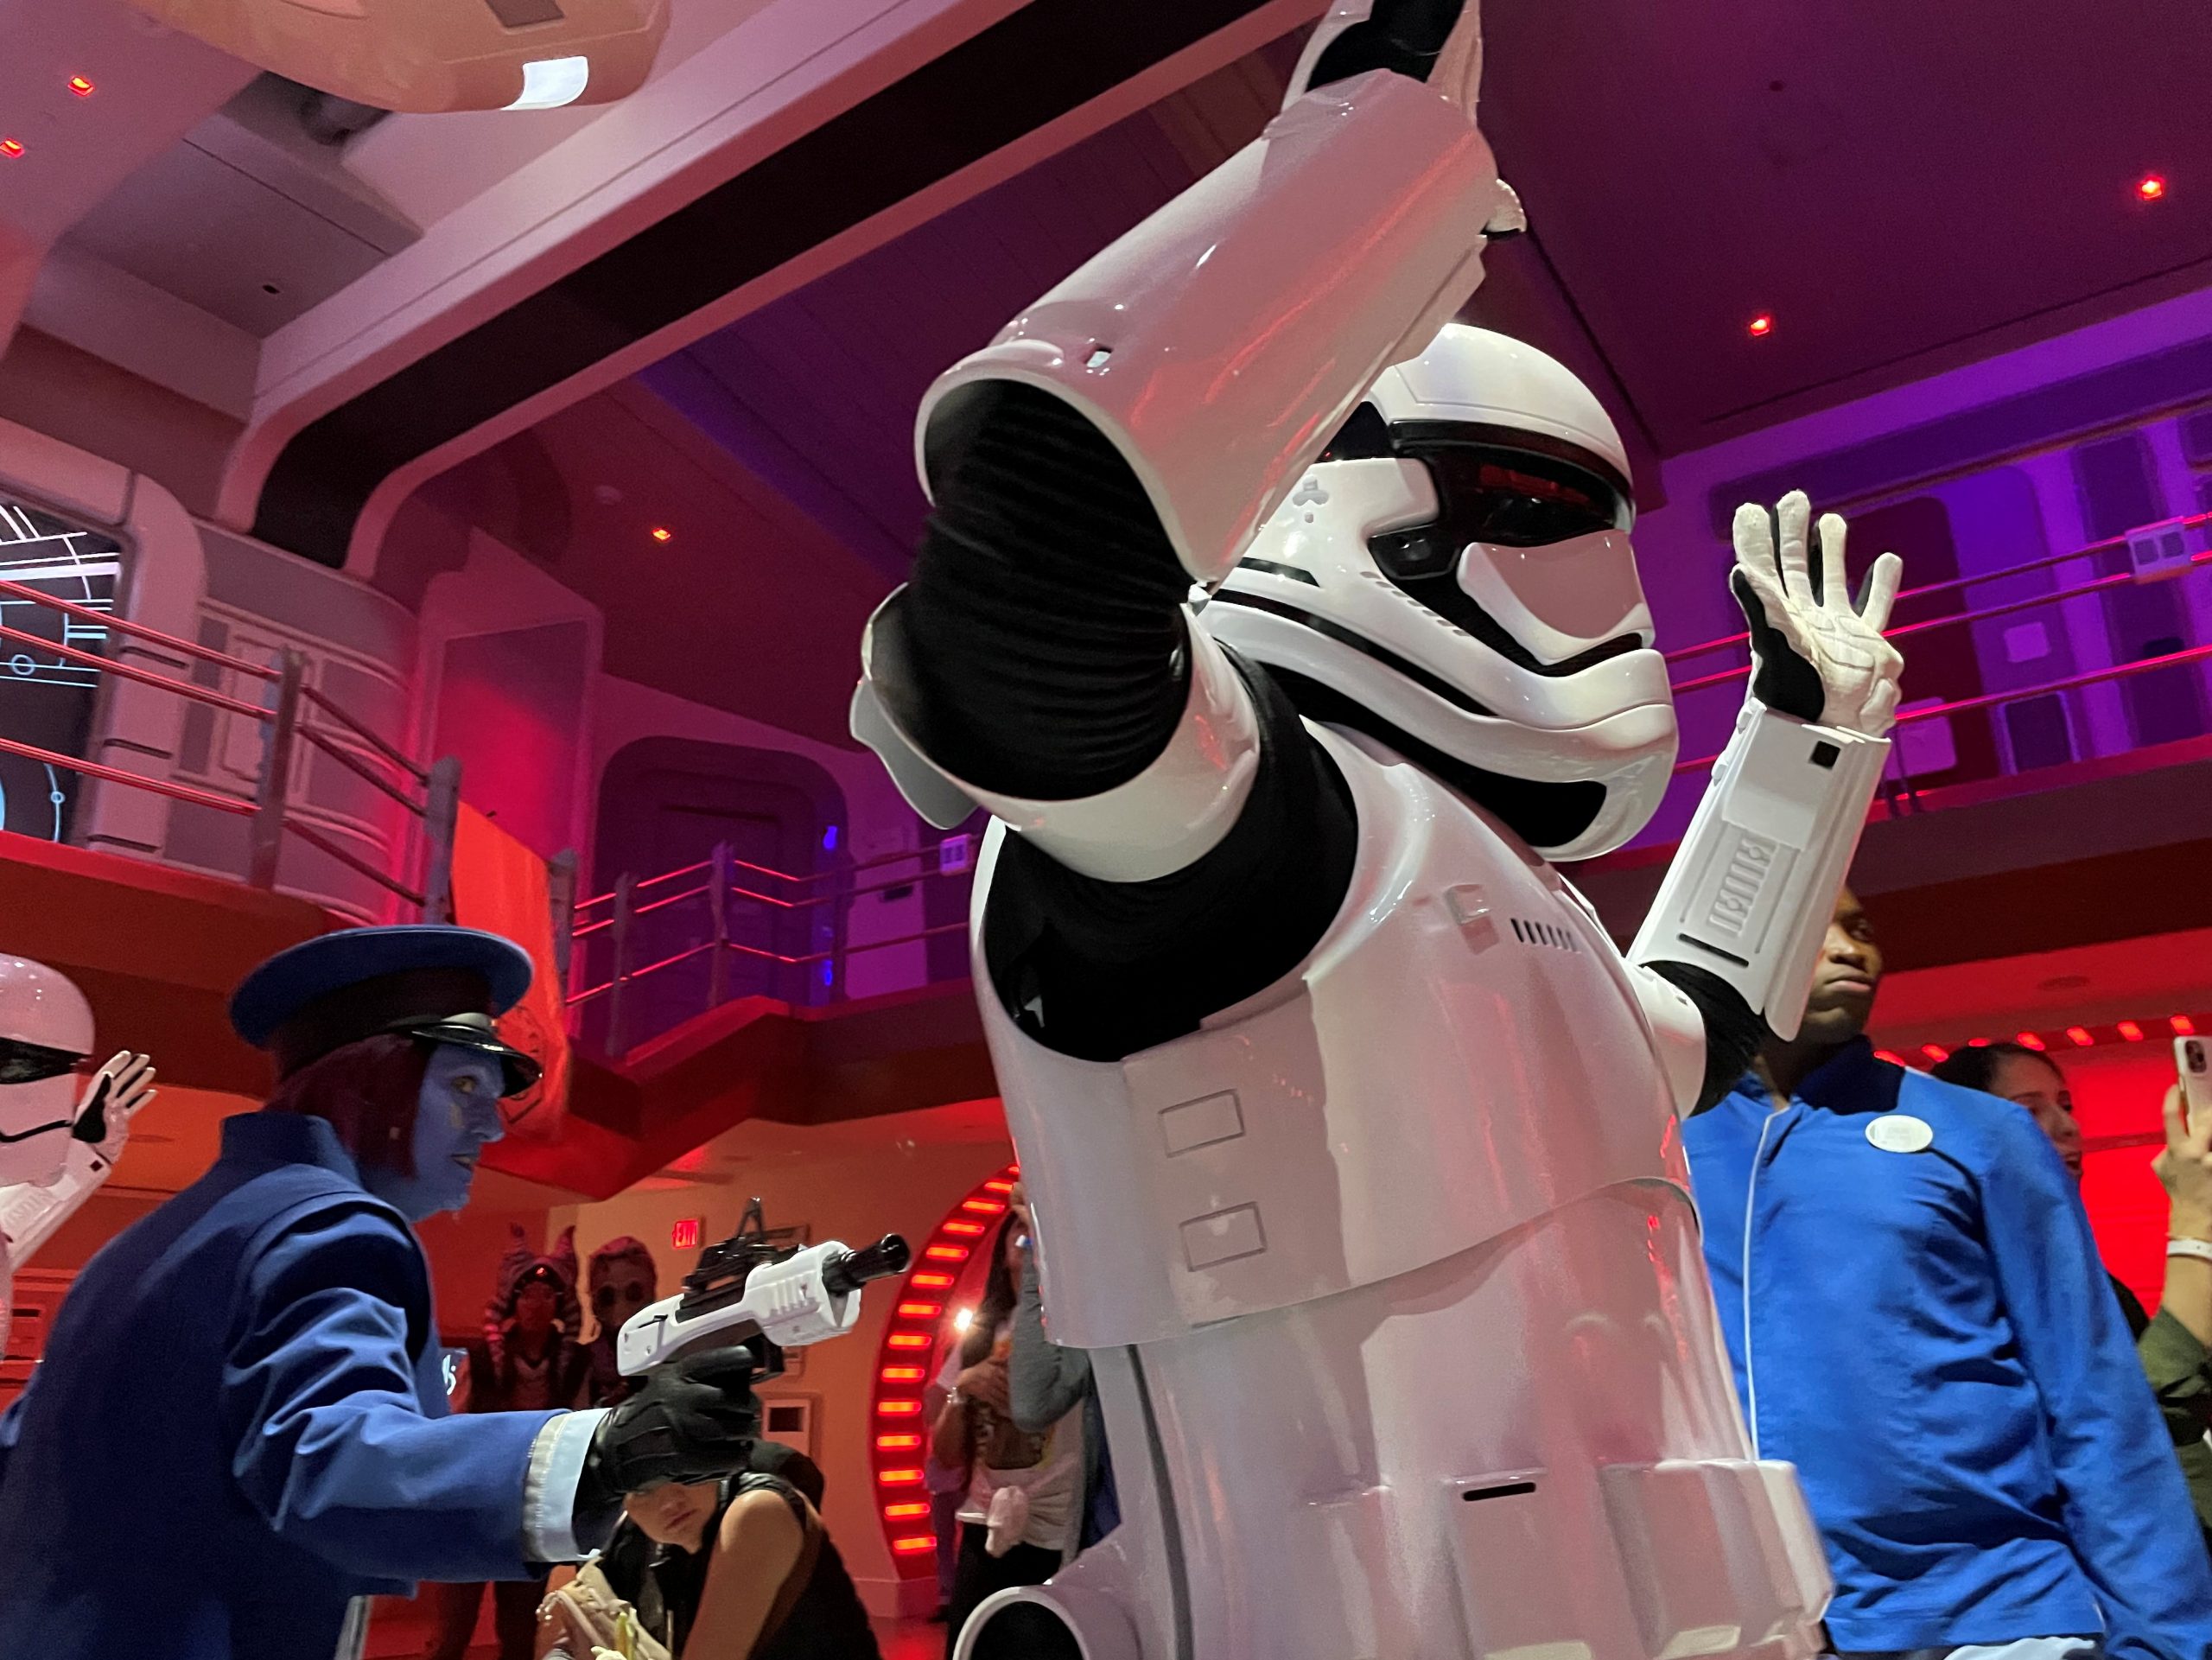 Disney launches new level of immersion in 'Star Wars' experience